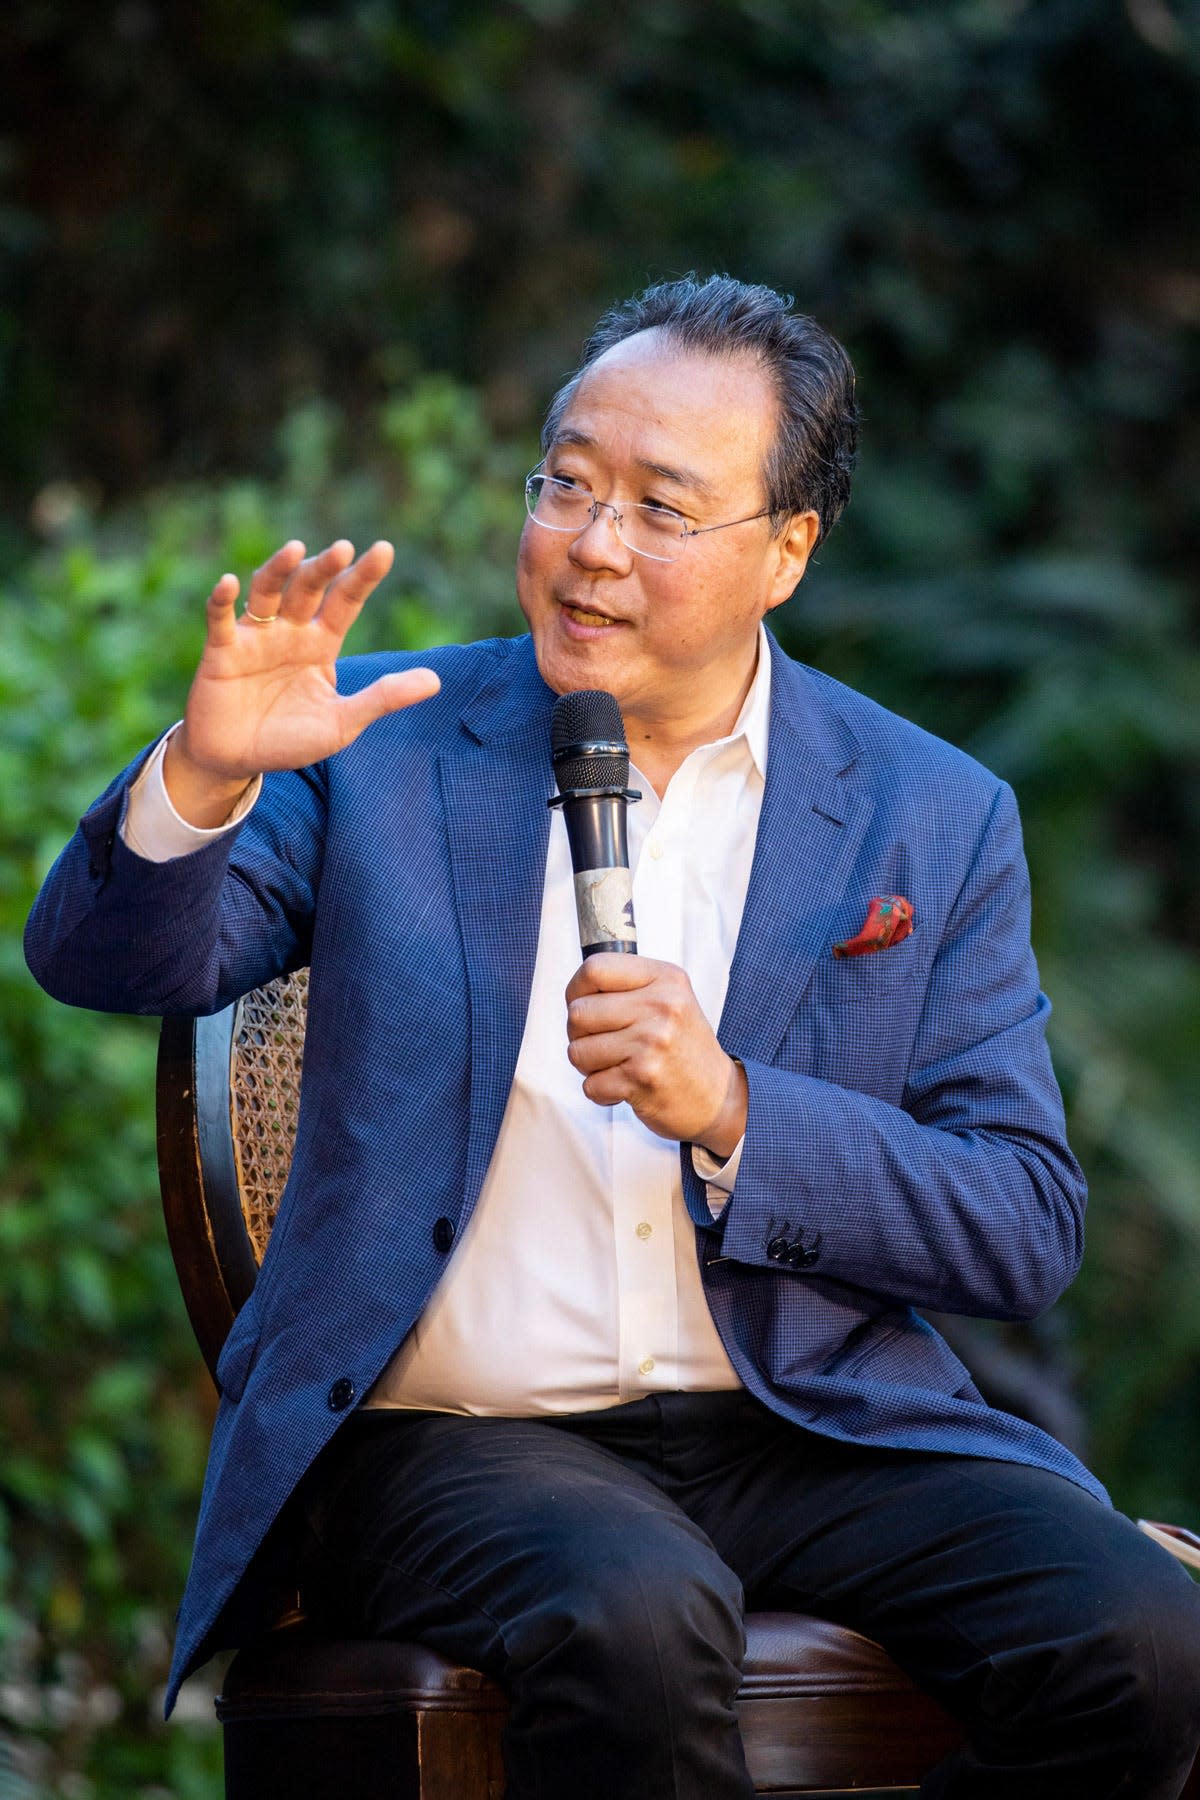 Yo-Yo Ma will be at the Kravis Center on Jan. 8 for an evening of conversation and music moderated by PBS NewsHour correspondent Jeffrey Brown. Tickets go on sale Oct. 18.